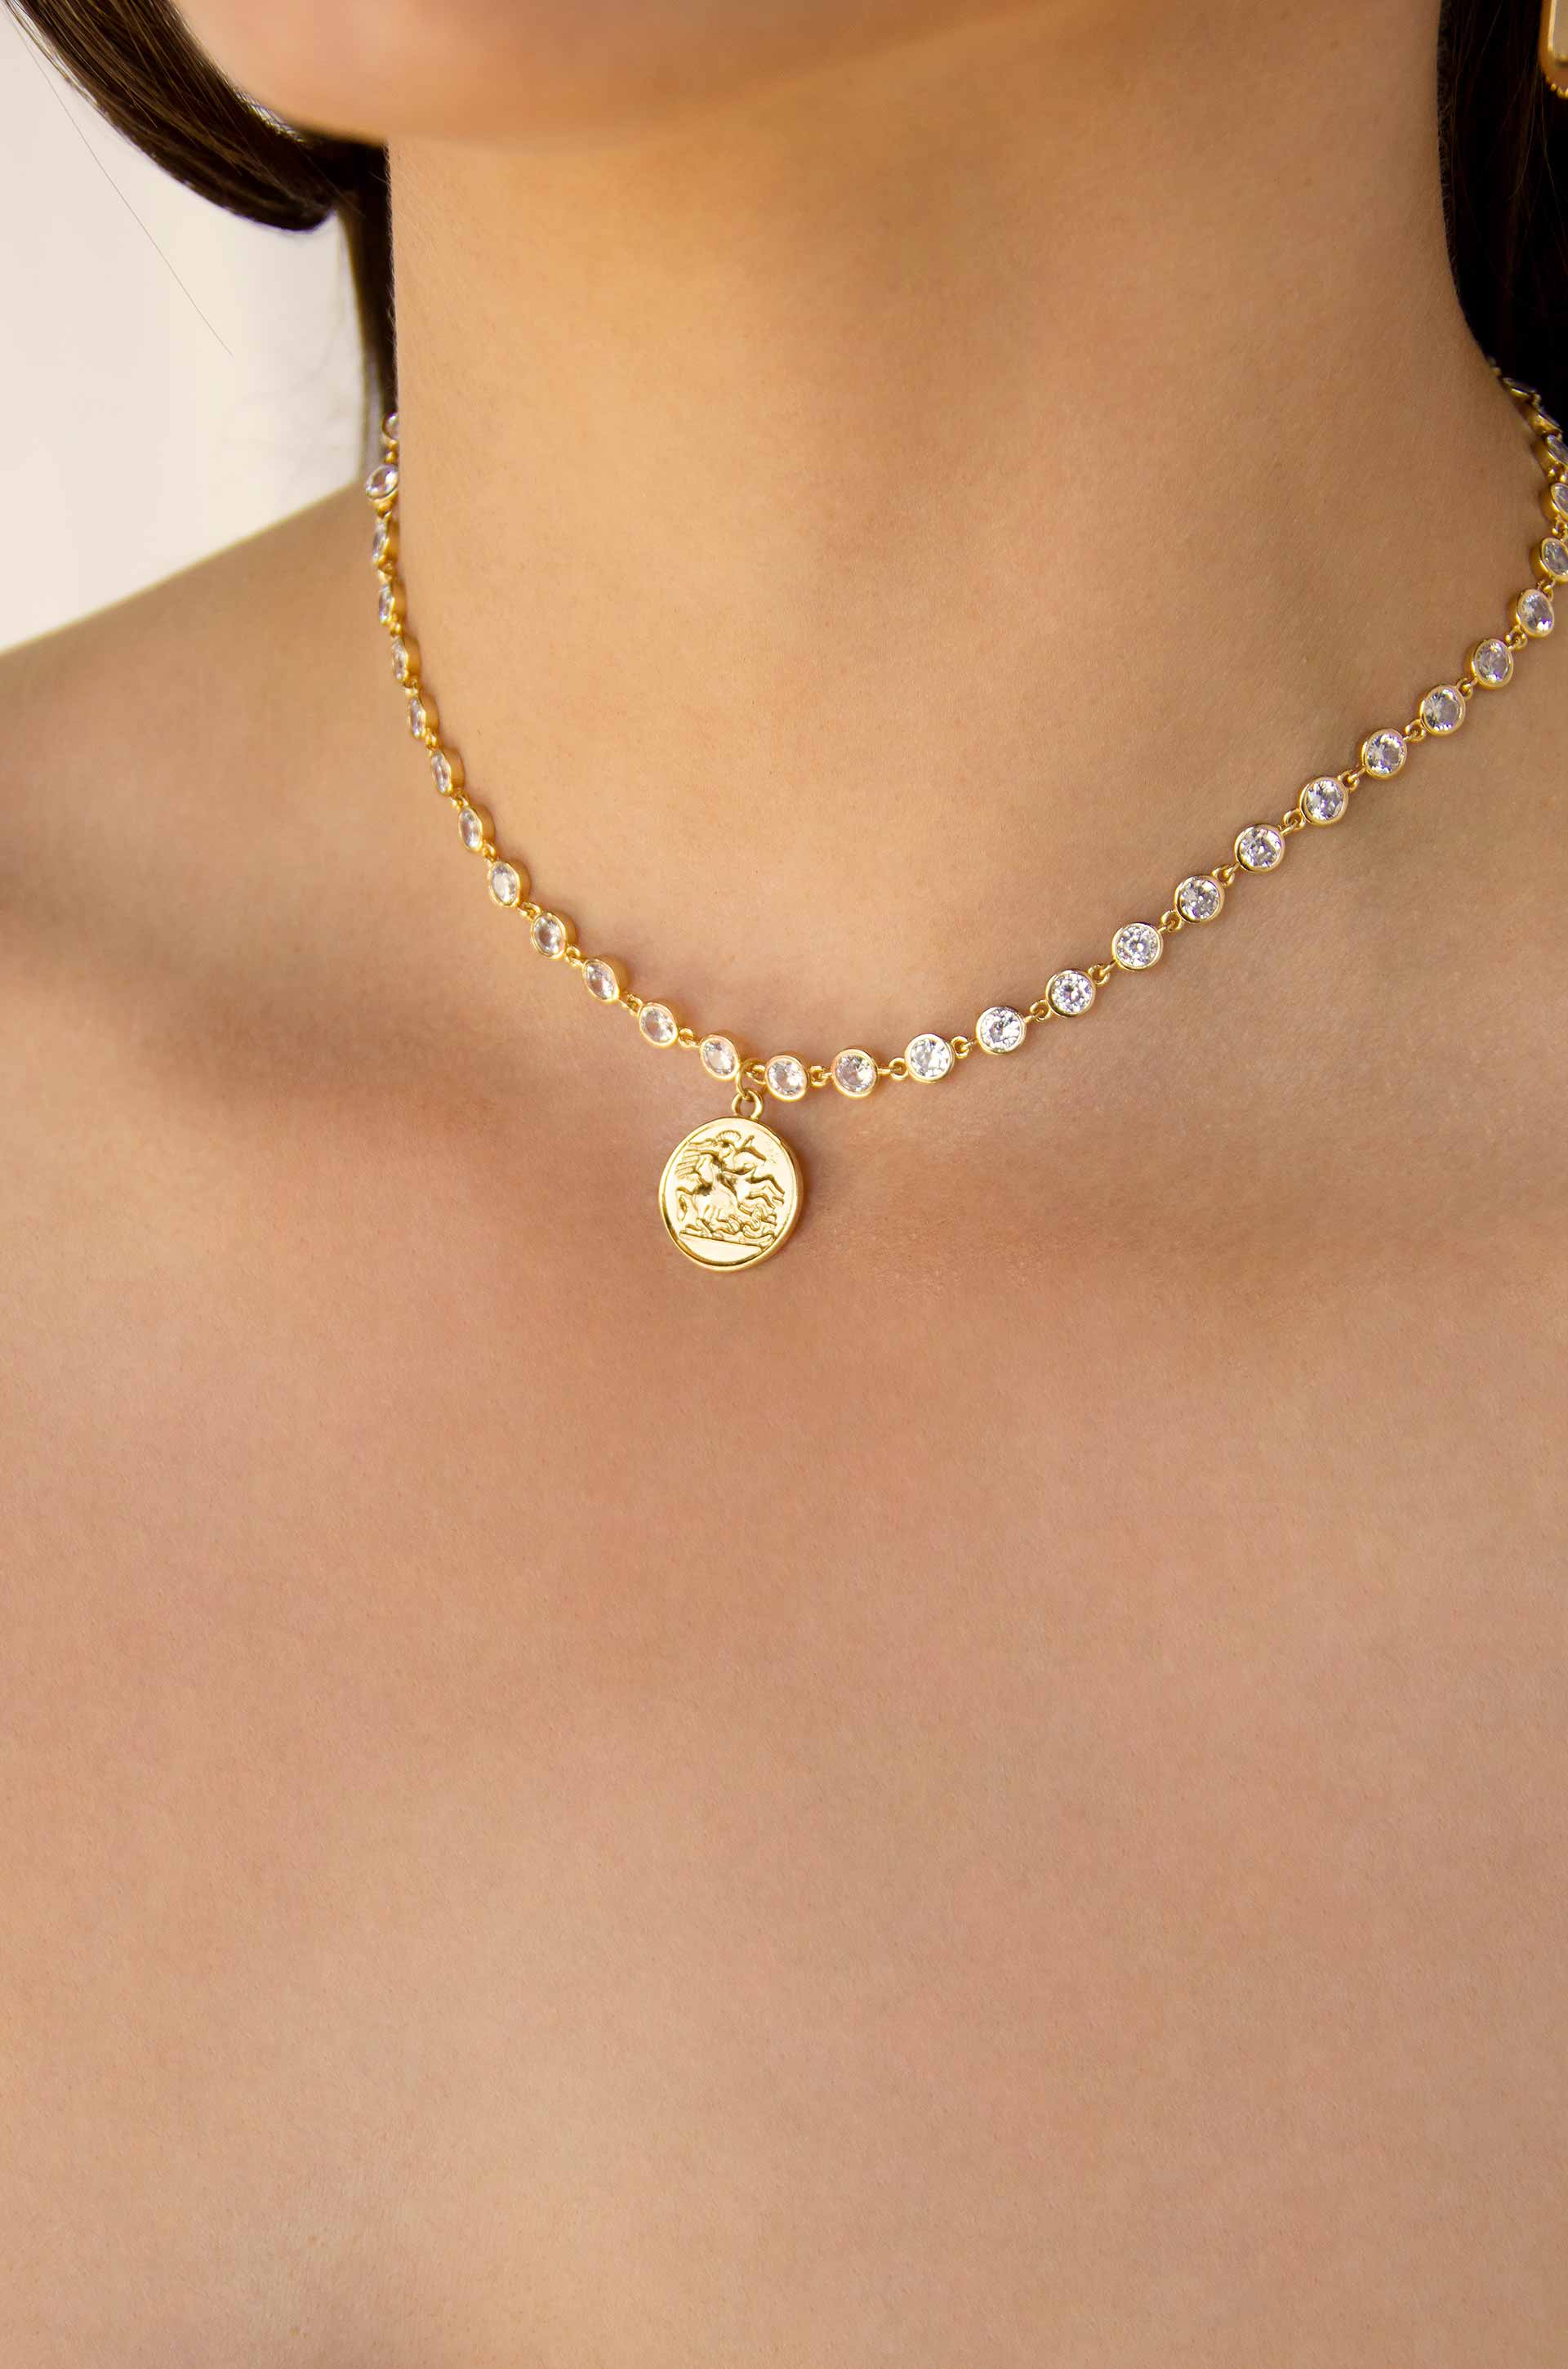 Destination Anywhere Crystal 18k Gold Plated Chain Necklace on model